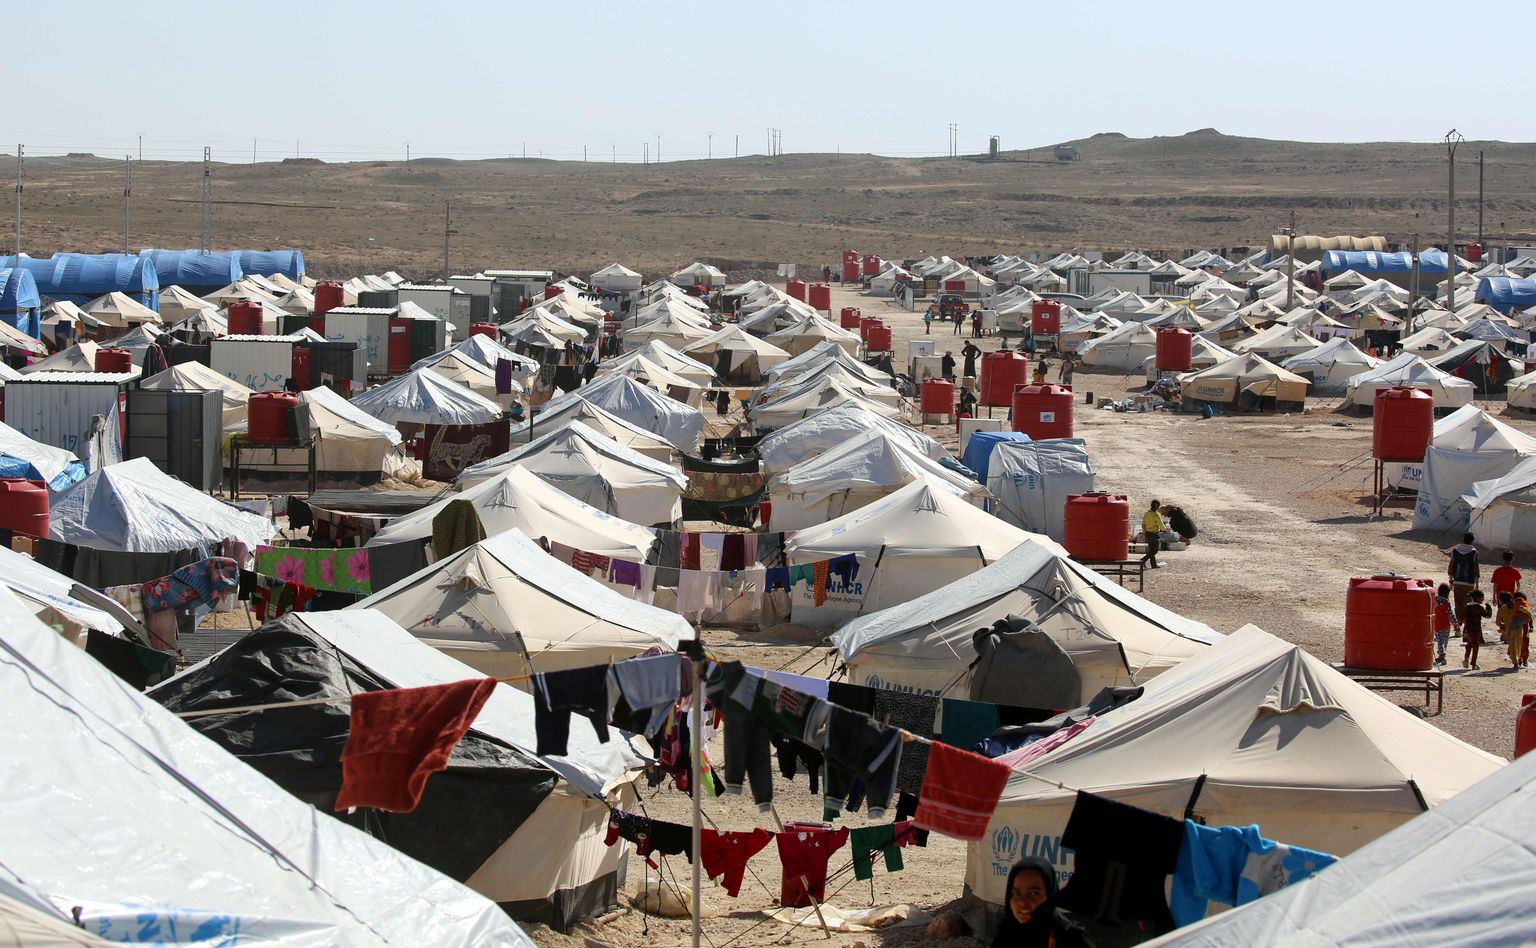 A picture taken on February 25, 2017 shows a general view of the tents housing displaced Iraqi refugees who have recently fled from Mosul in a camp in al-Hol, located some 14 kilometers from the Iraqi border in SyriaÂs northeastern Hassakeh province. / AFP PHOTO / DELIL SOULEIMAN